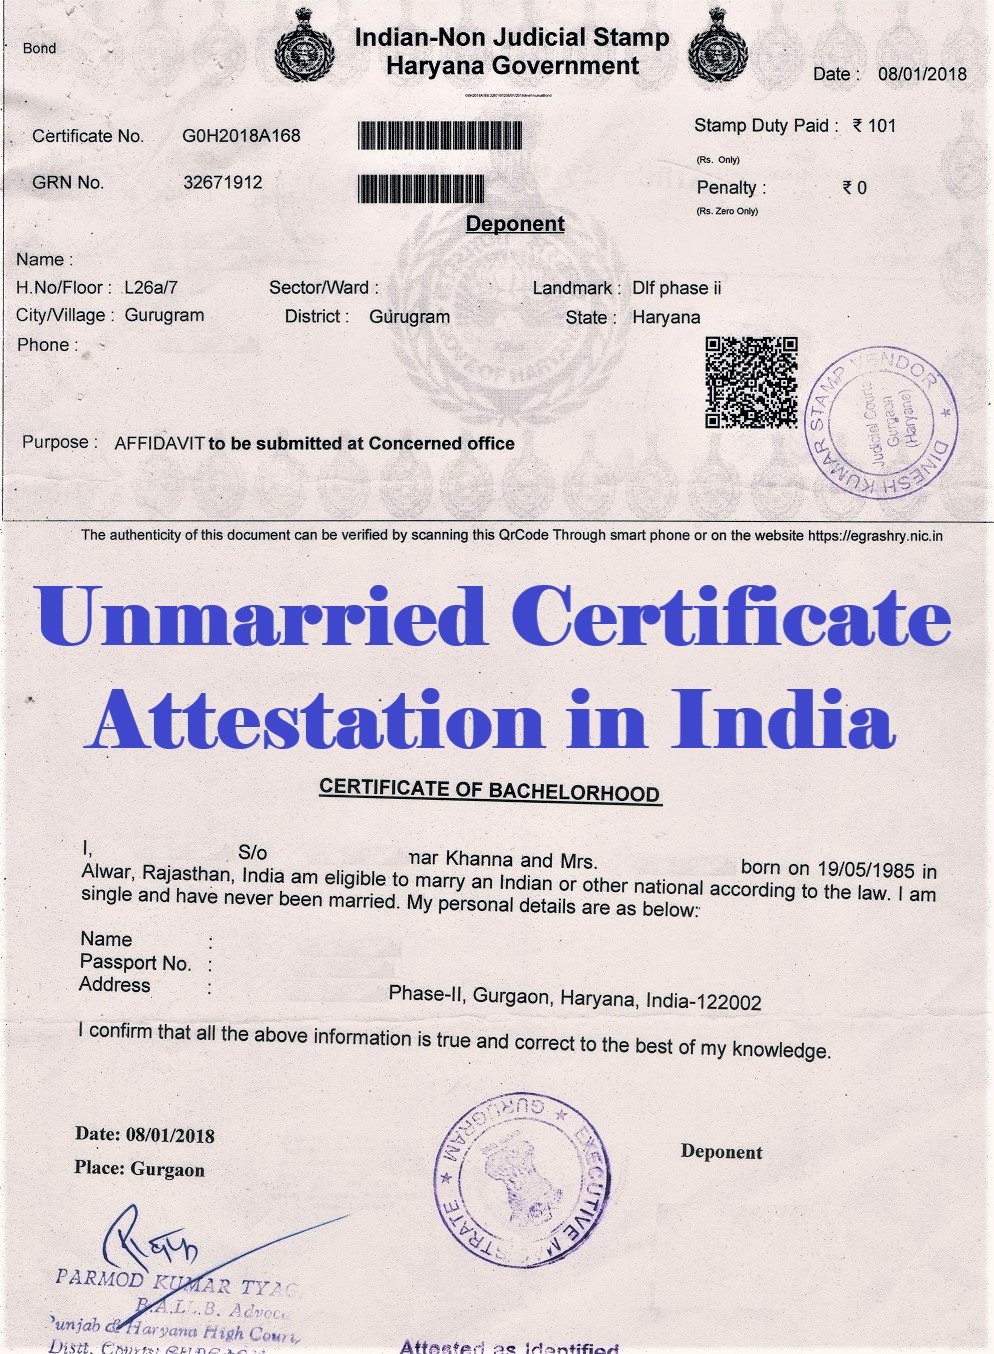 Unmarried Certificate Attestation from Comoros Embassy